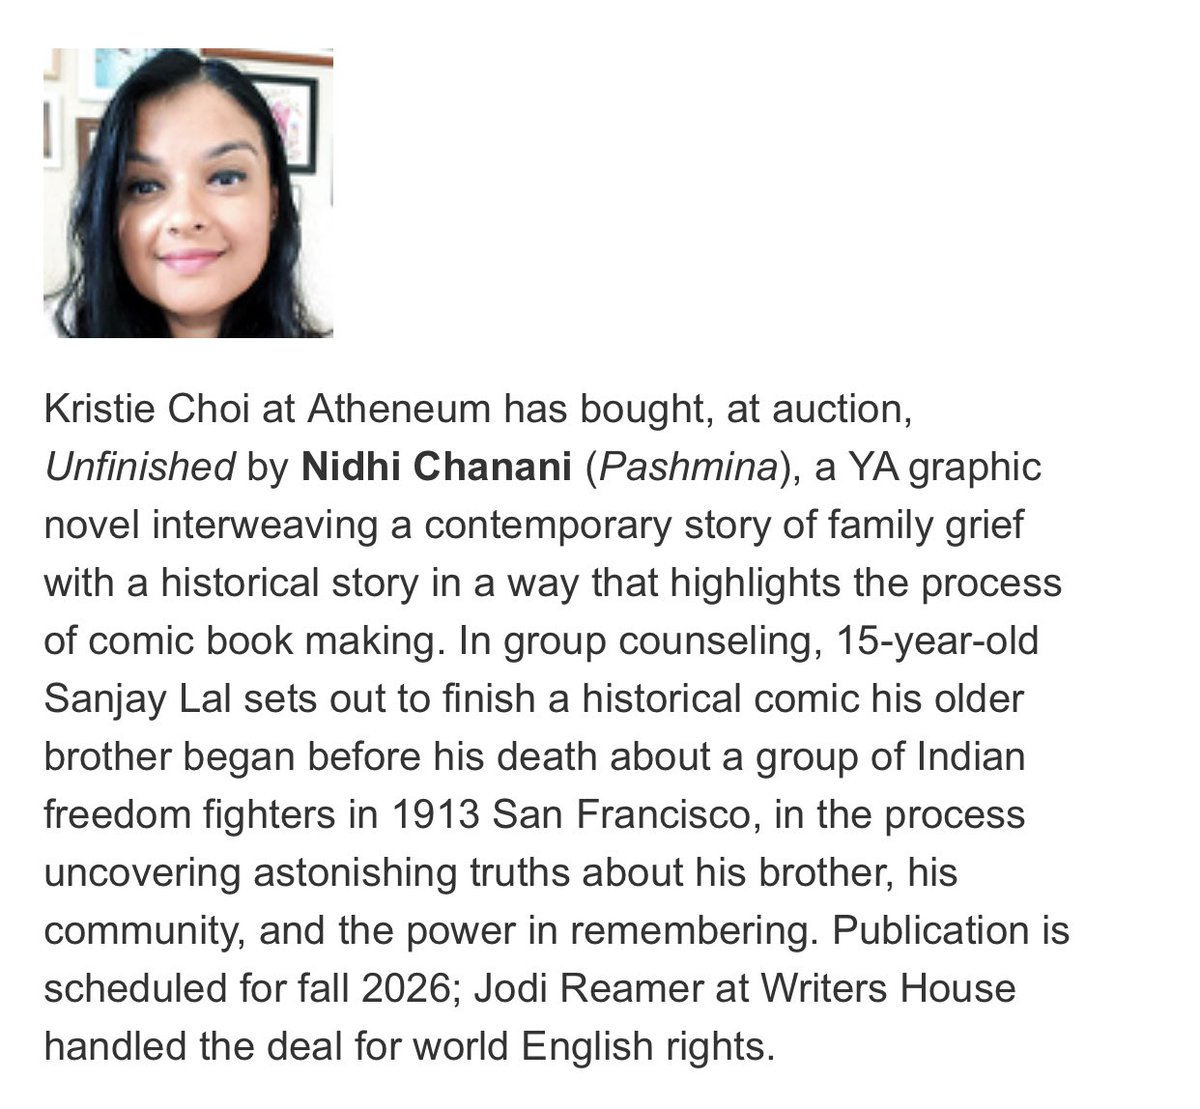 UNFINISHED is my most ambitious book yet. When I began writing in 2022 I didn't know where it would take me - how @jodiesque would push me to a story that envelopes loss, Indian American history and comics. When @minjipatterson acquired it, we pushed even more.